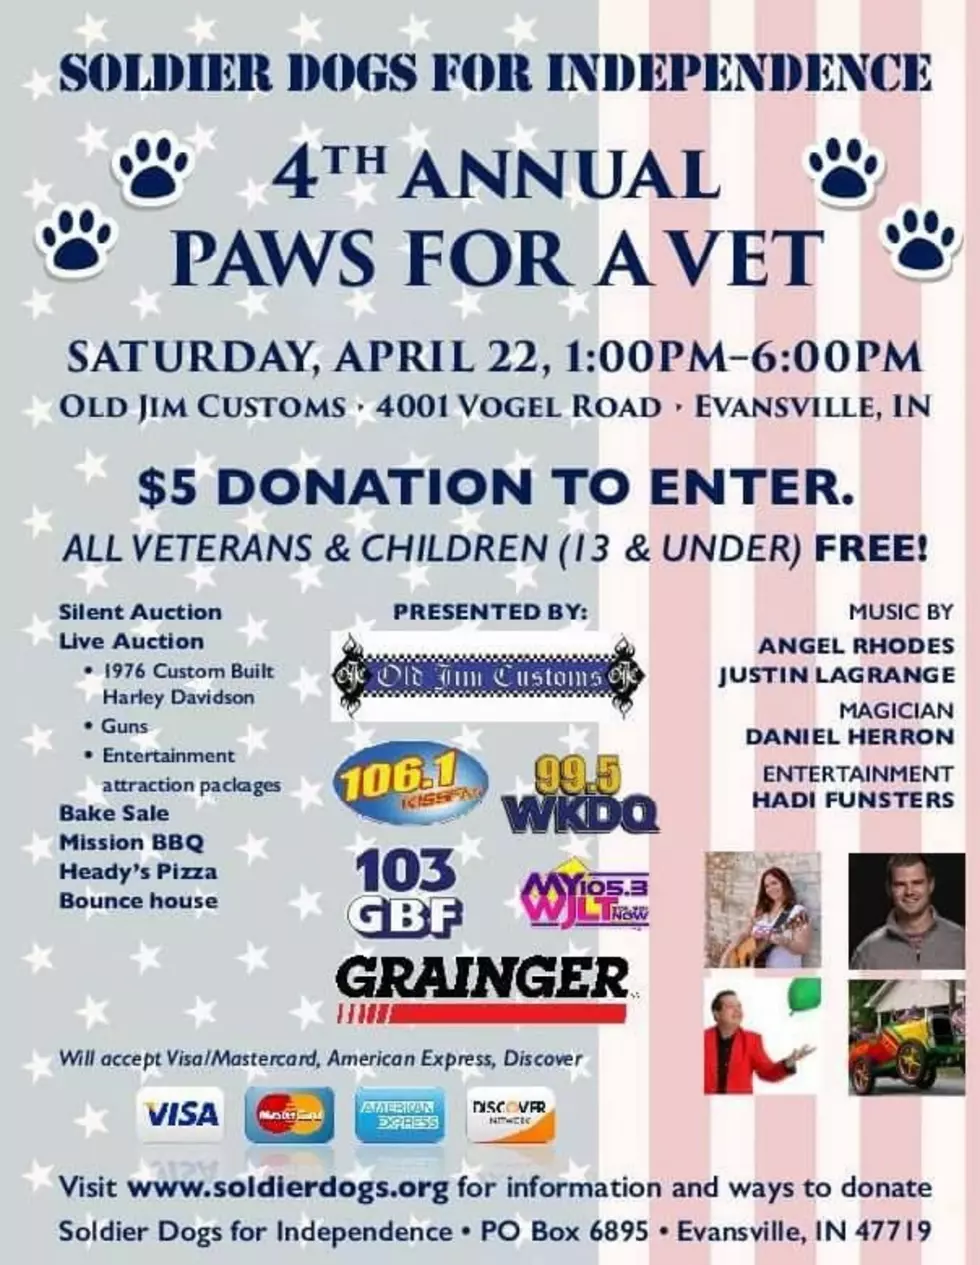 4th annual Paws for Vets Fundraiser Coming Up On April 22nd